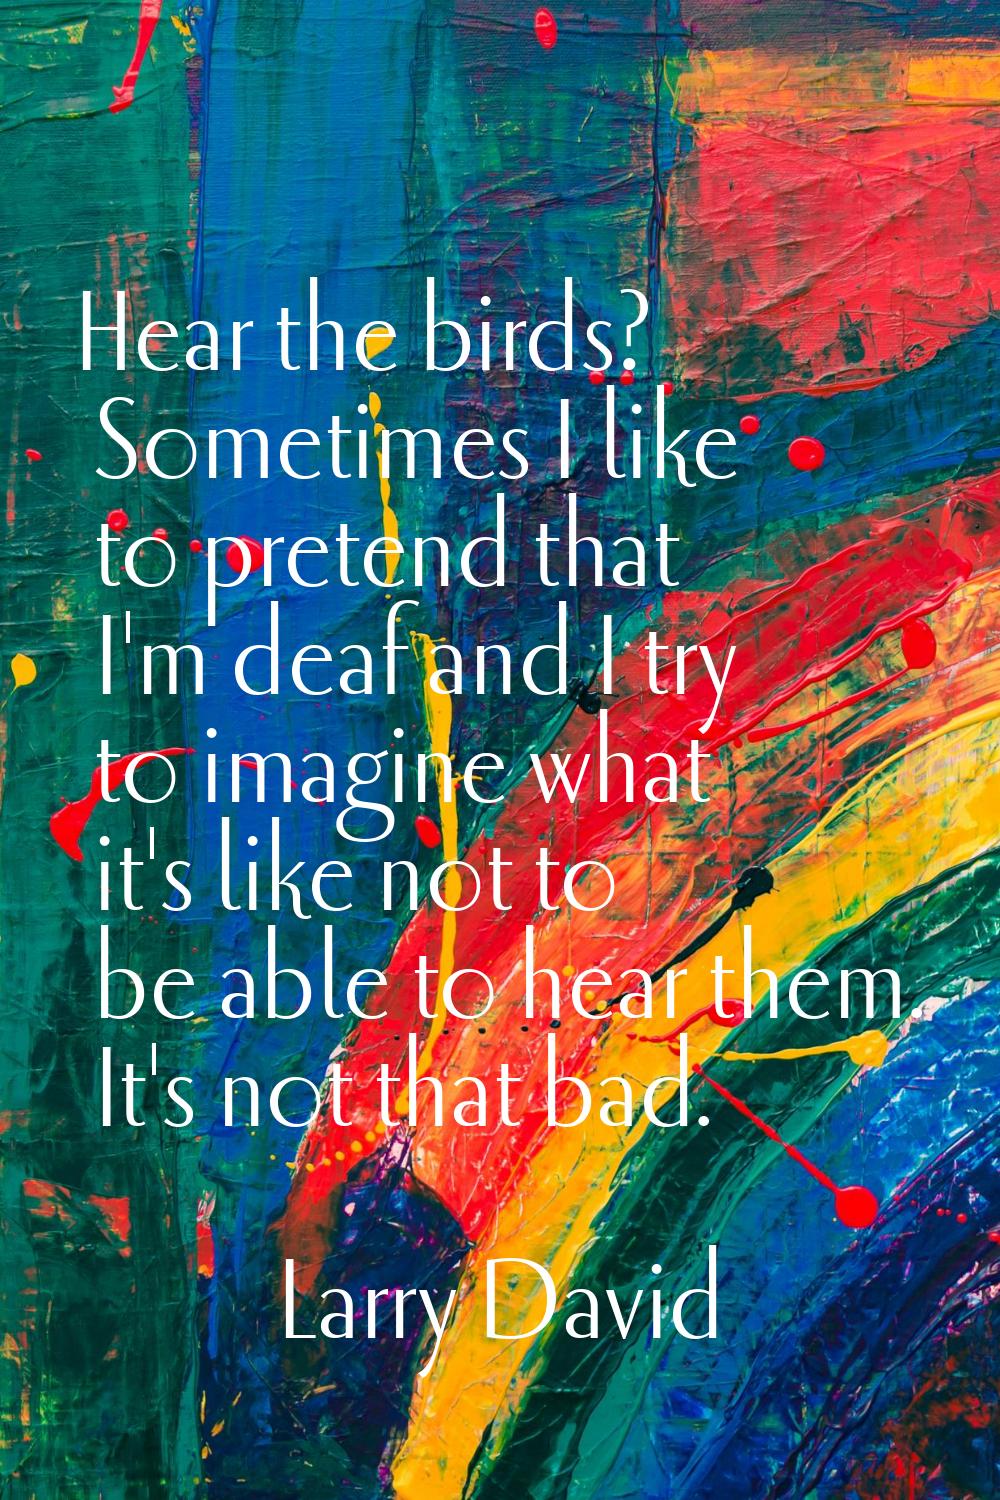 Hear the birds? Sometimes I like to pretend that I'm deaf and I try to imagine what it's like not t